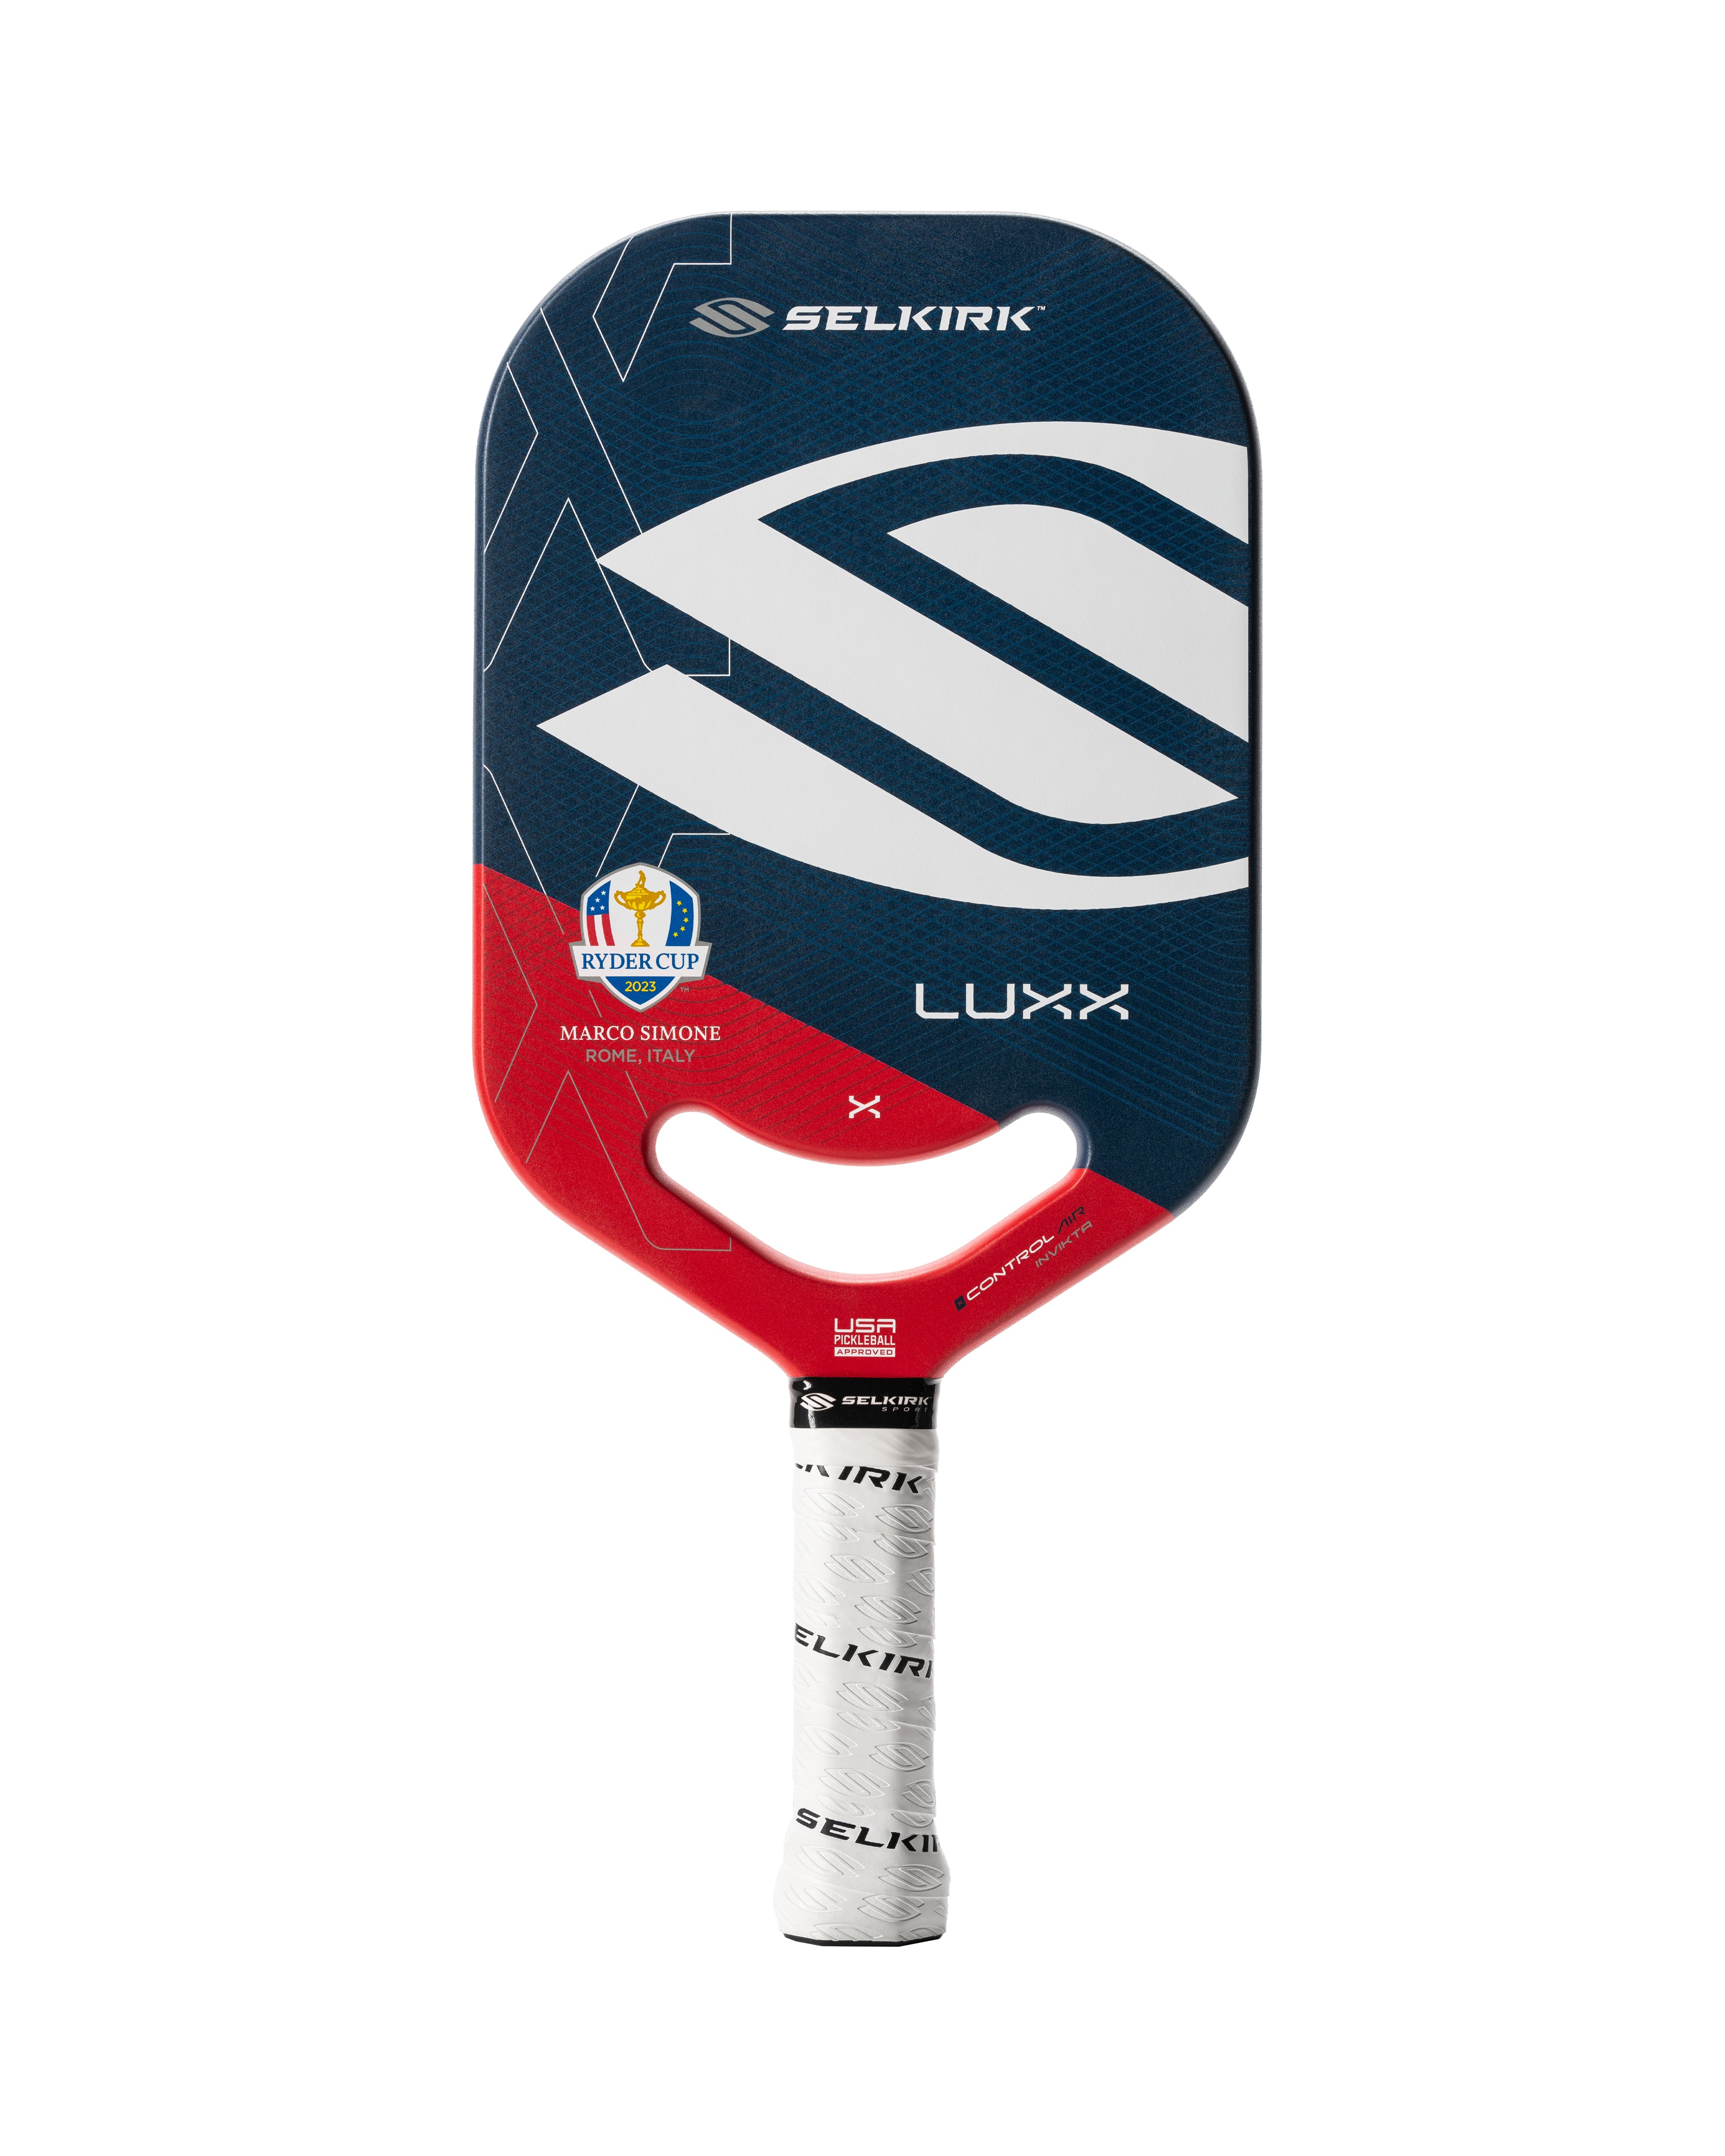 Selkirk Ryder Cup Limited Edition Luxx Control Air Invikta Pickleball Paddle.